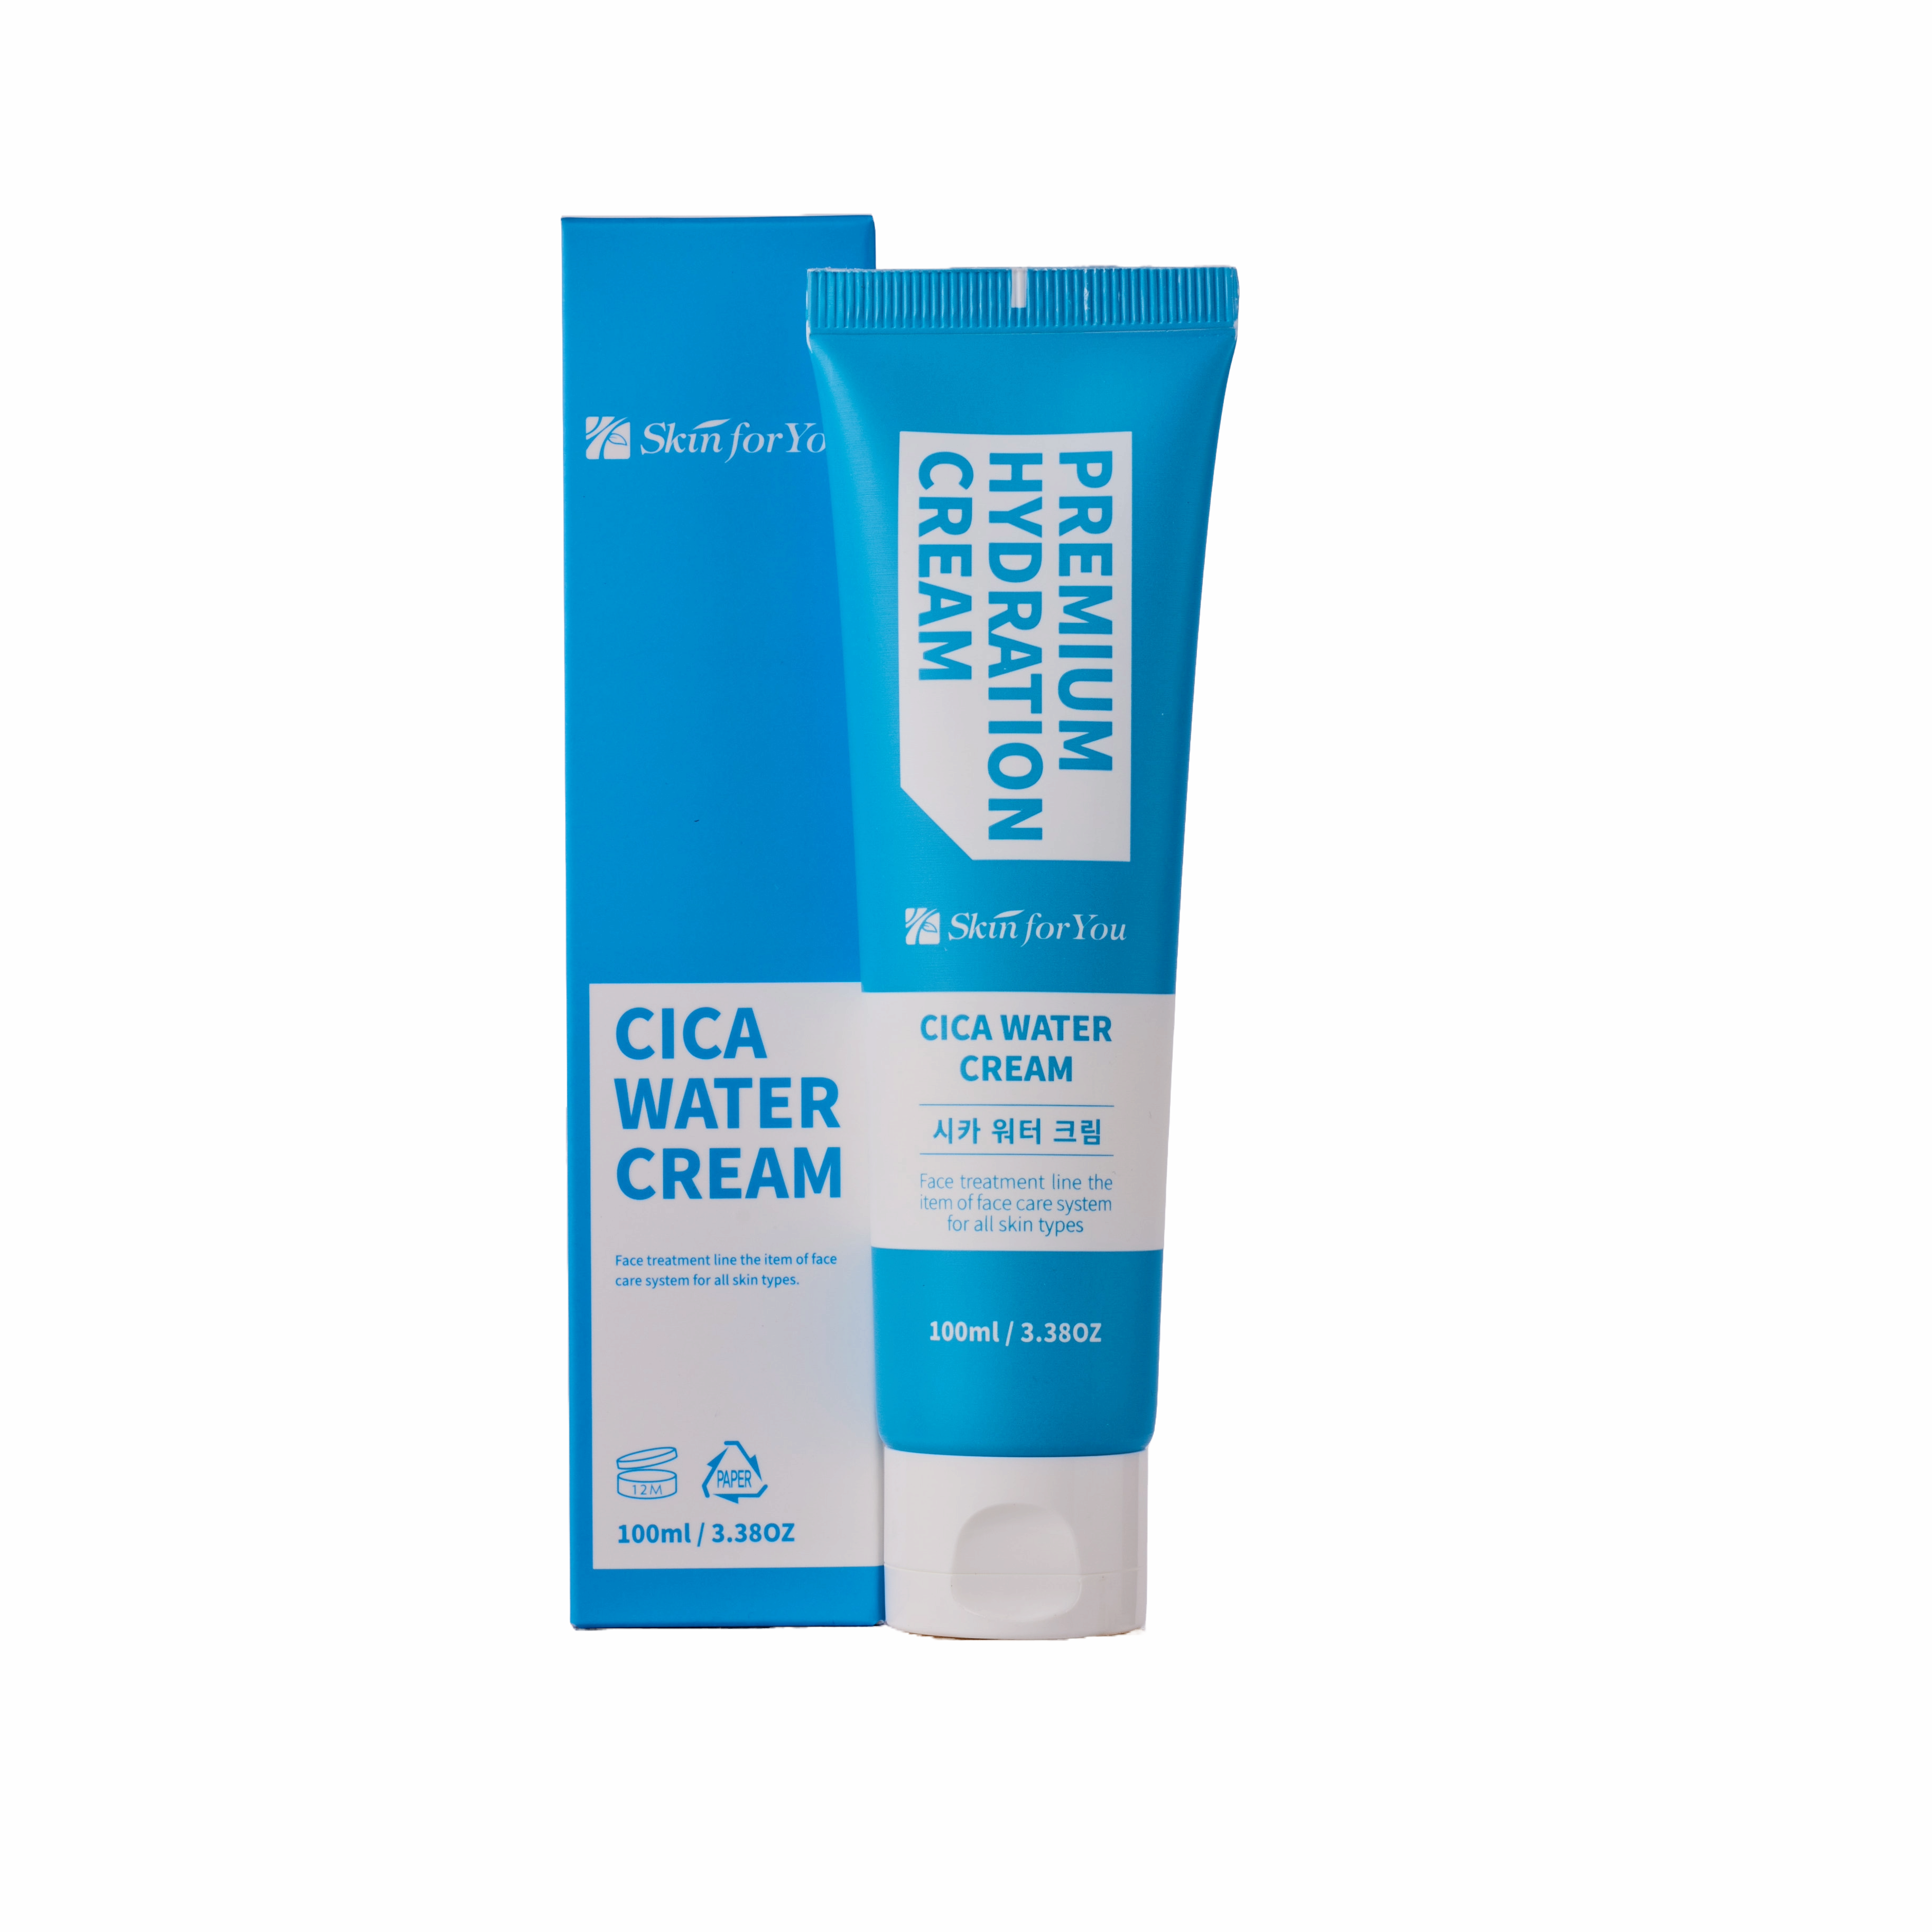 Skin for You CICA WATER CREAM Hypoallergenic Product Soothing and Moisturizing Effect Trouble Care